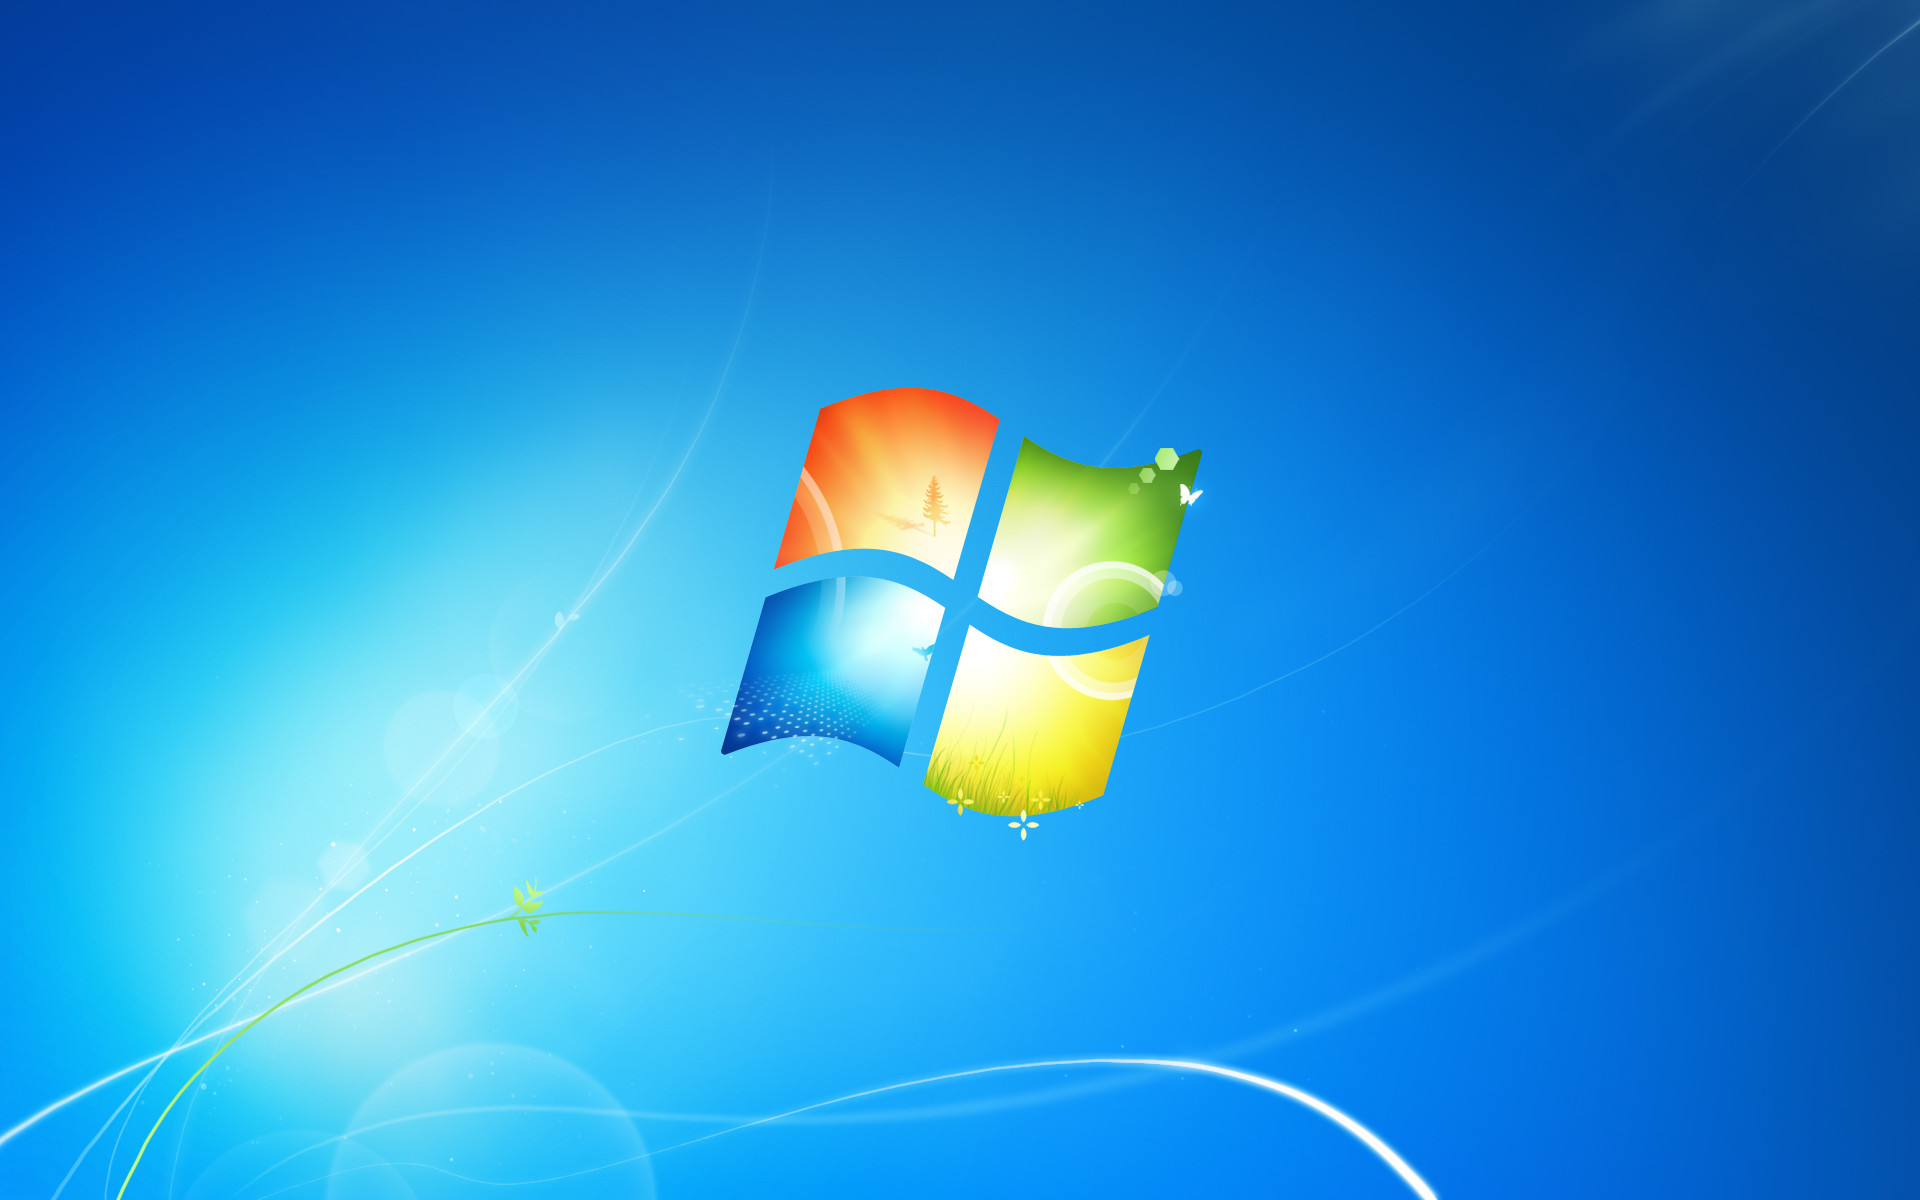 Windows Background Pictures Image